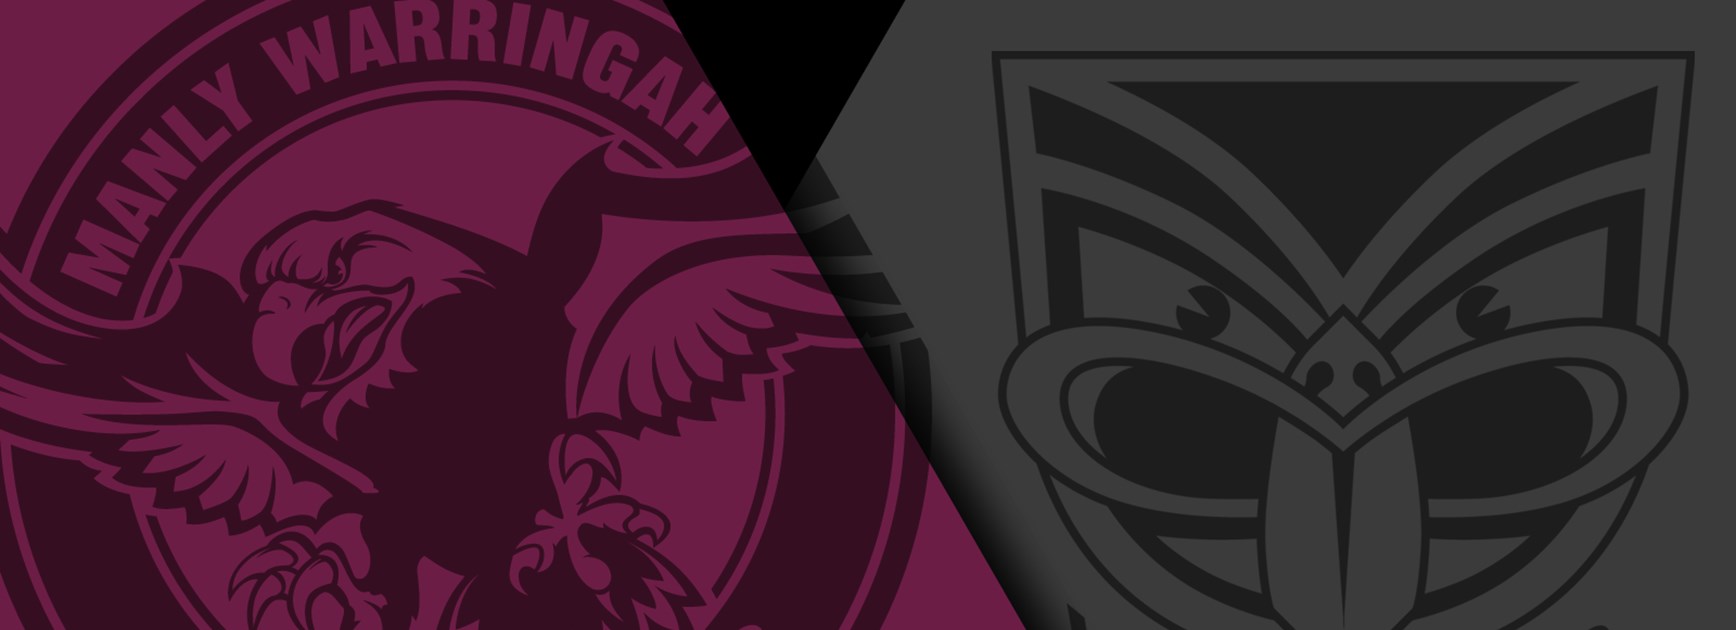 Will the Sea Eagles beat the Warriors on Saturday?